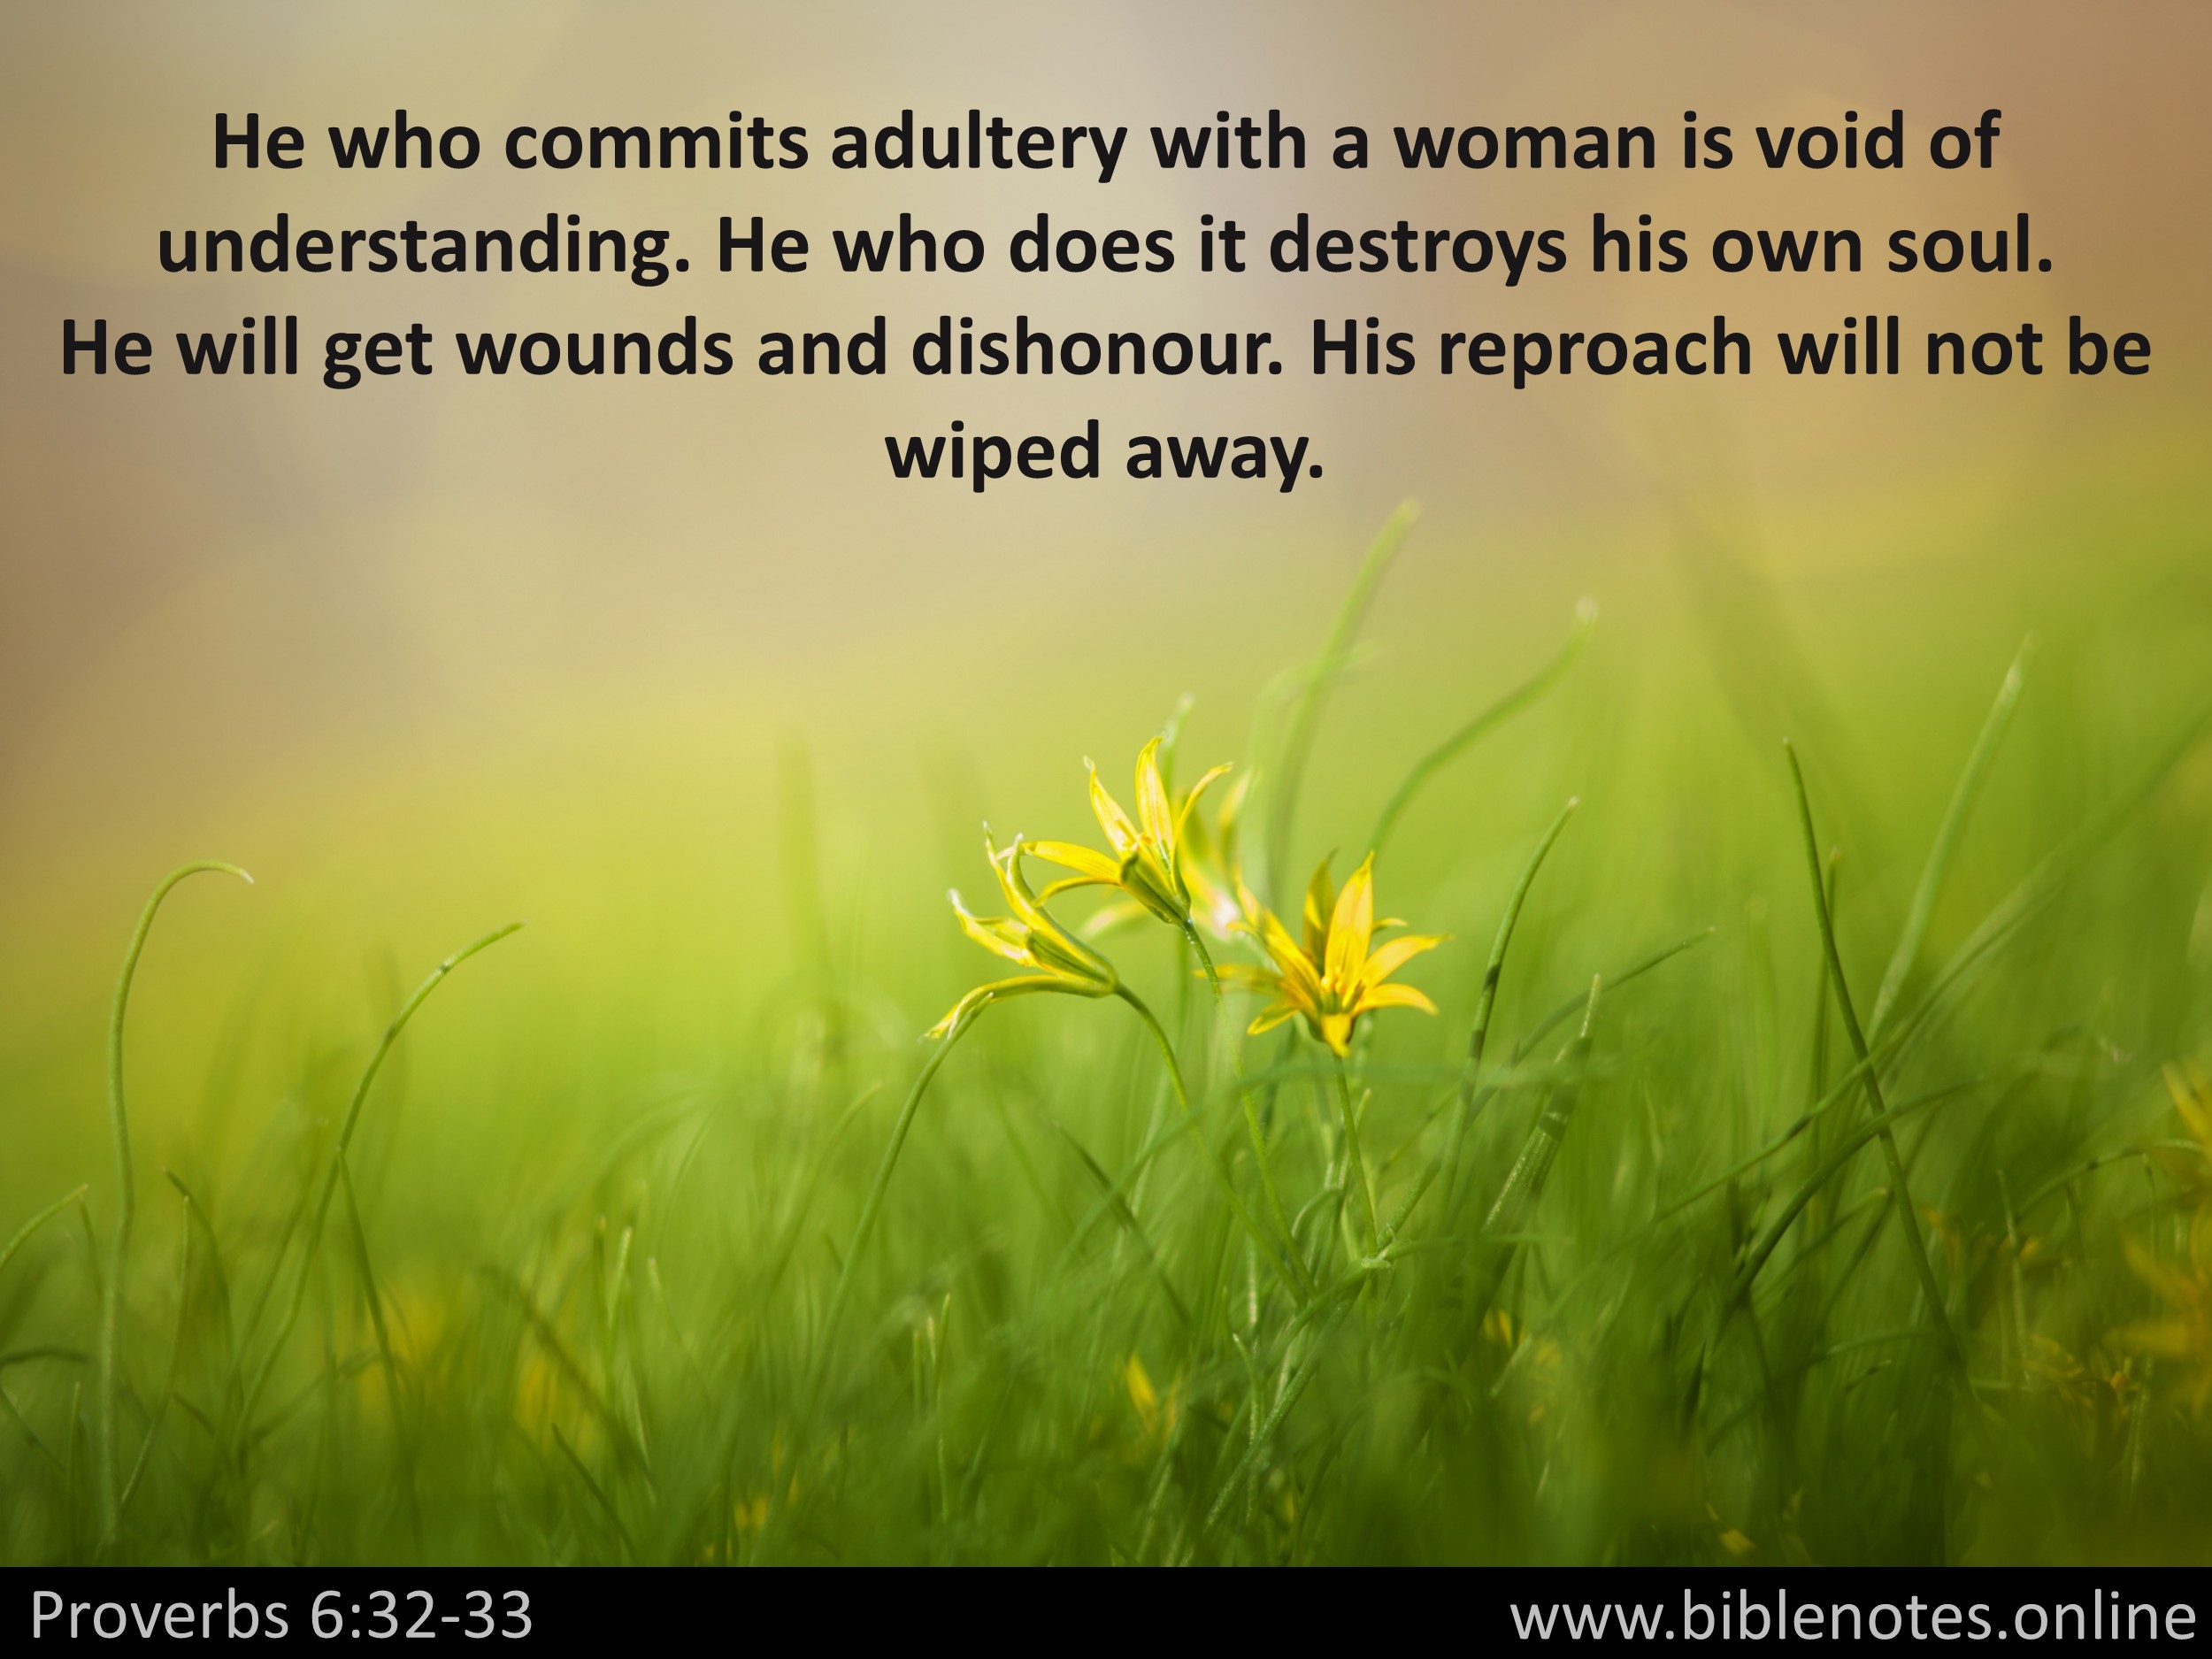 Bible Verse from Proverbs Chapter 6